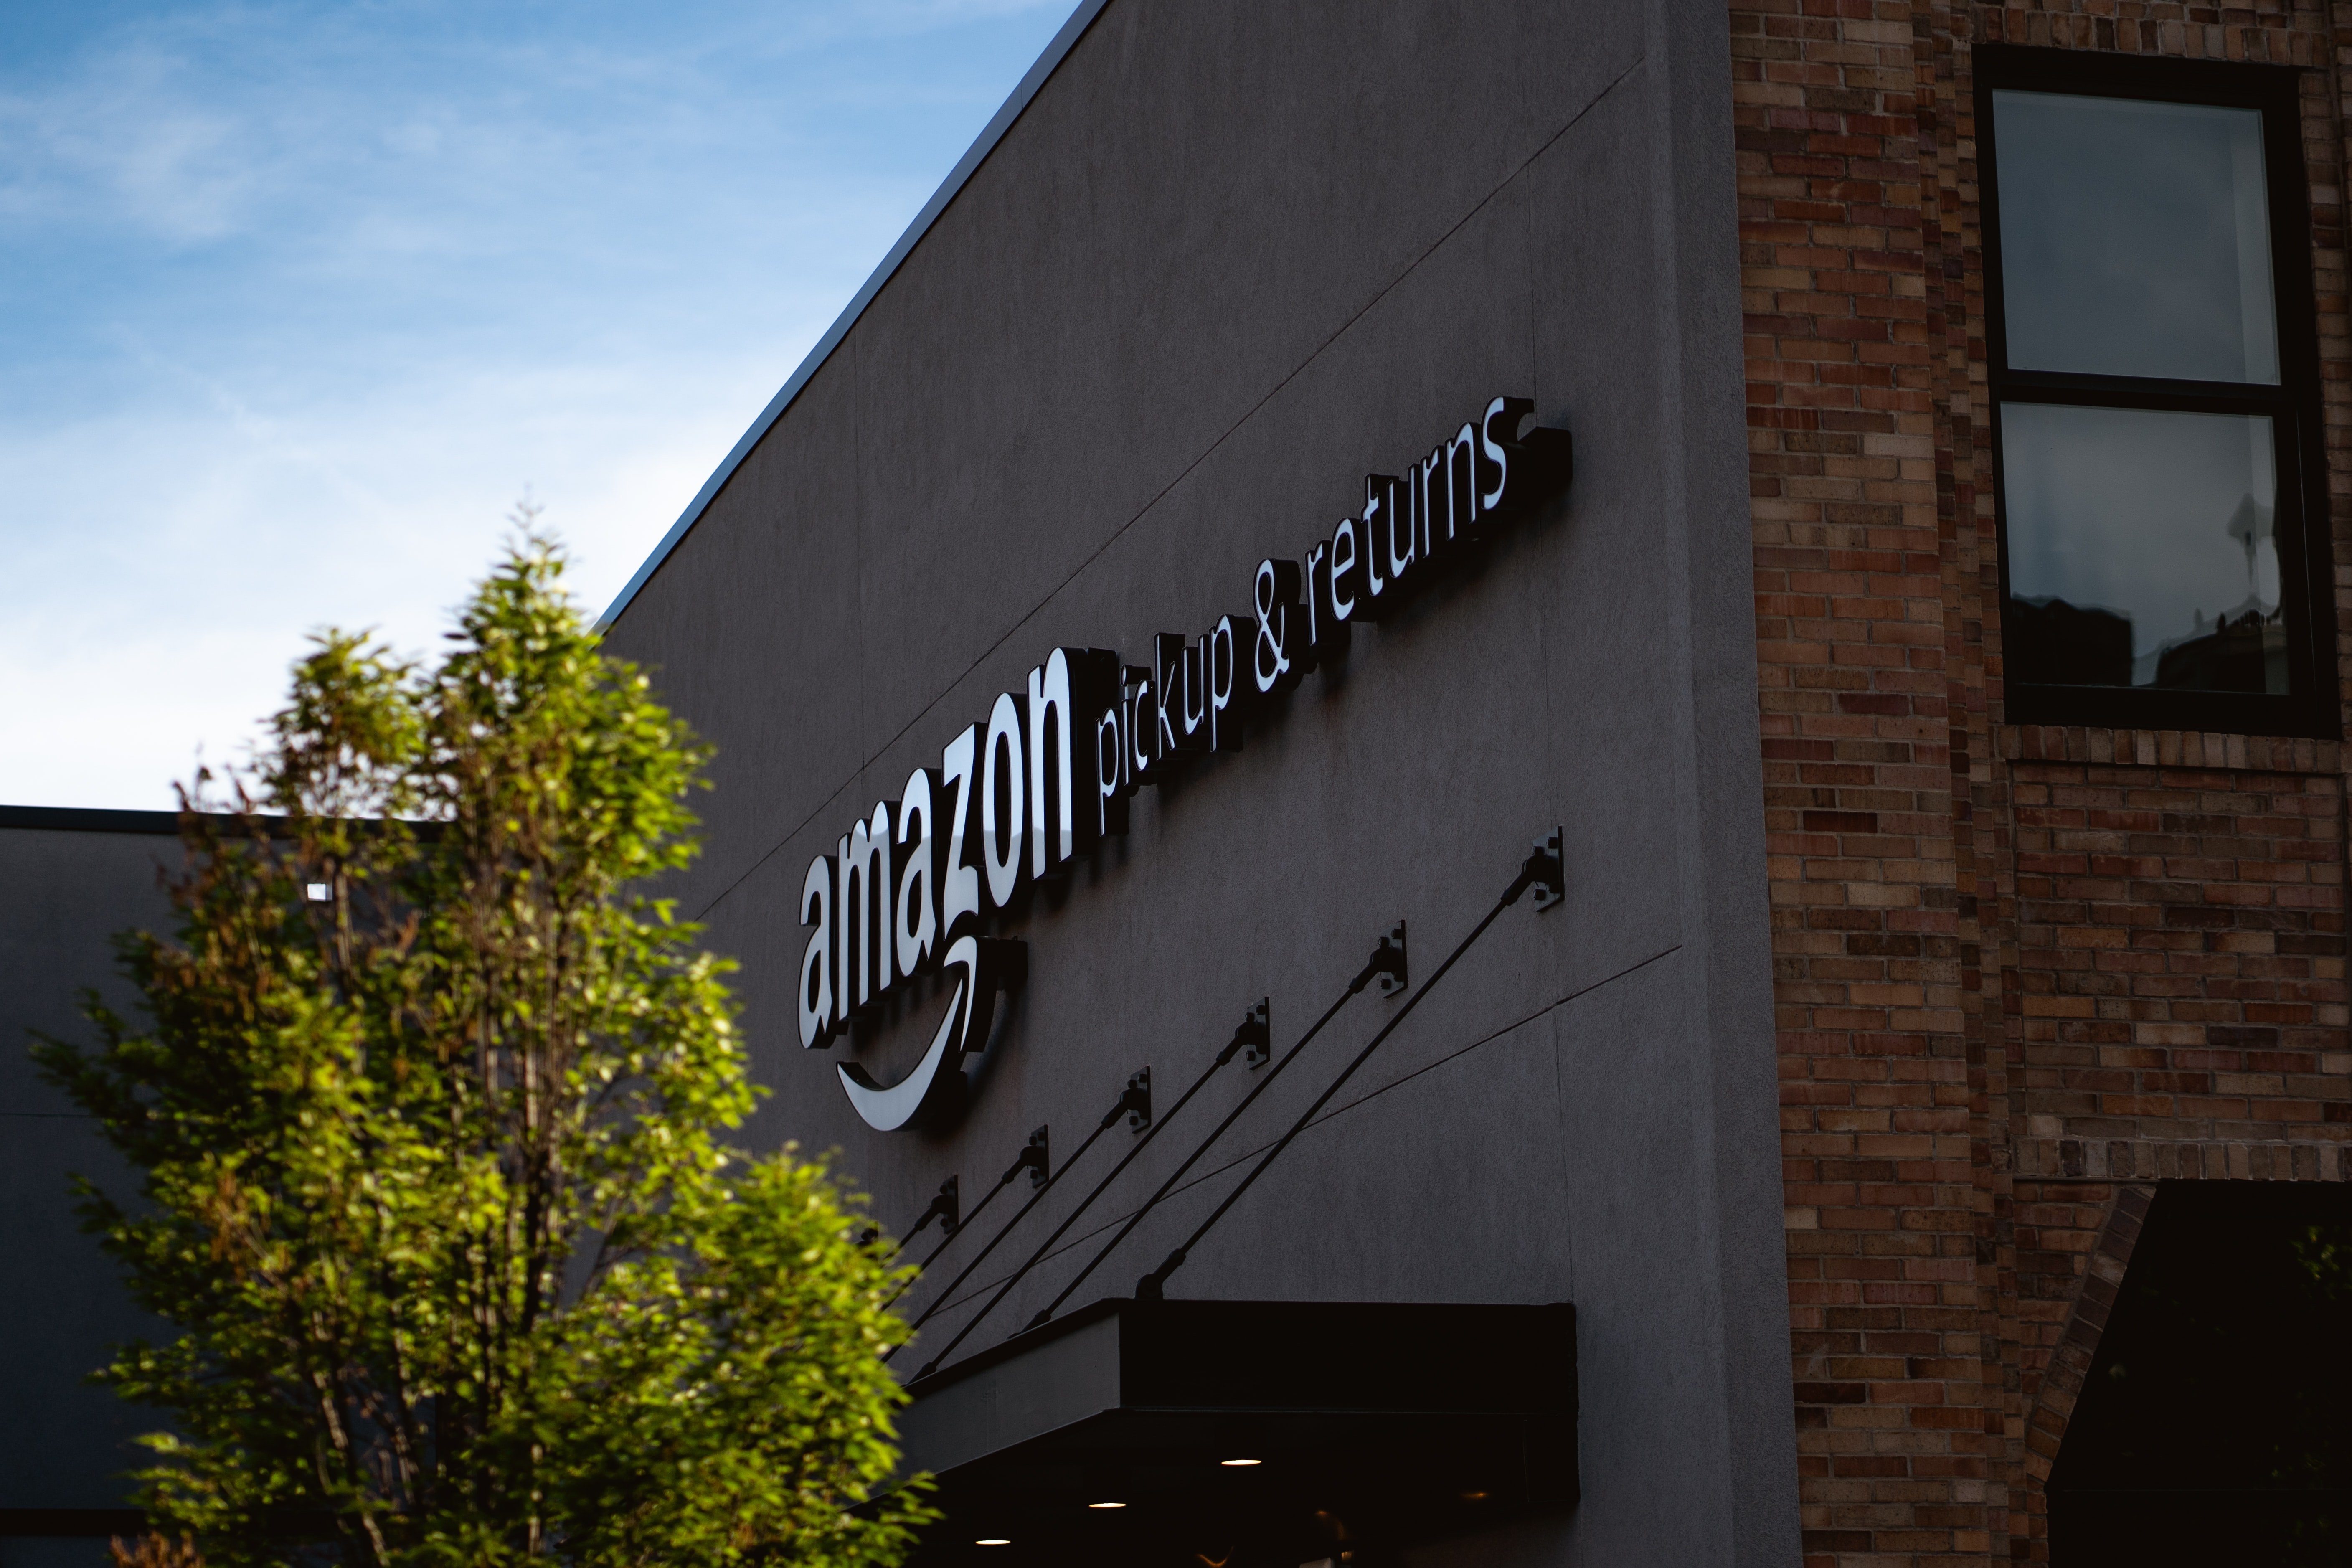 One of the Amazon buildings that houses their pickups and returns | Photo: Unsplash/Bryan Angelo